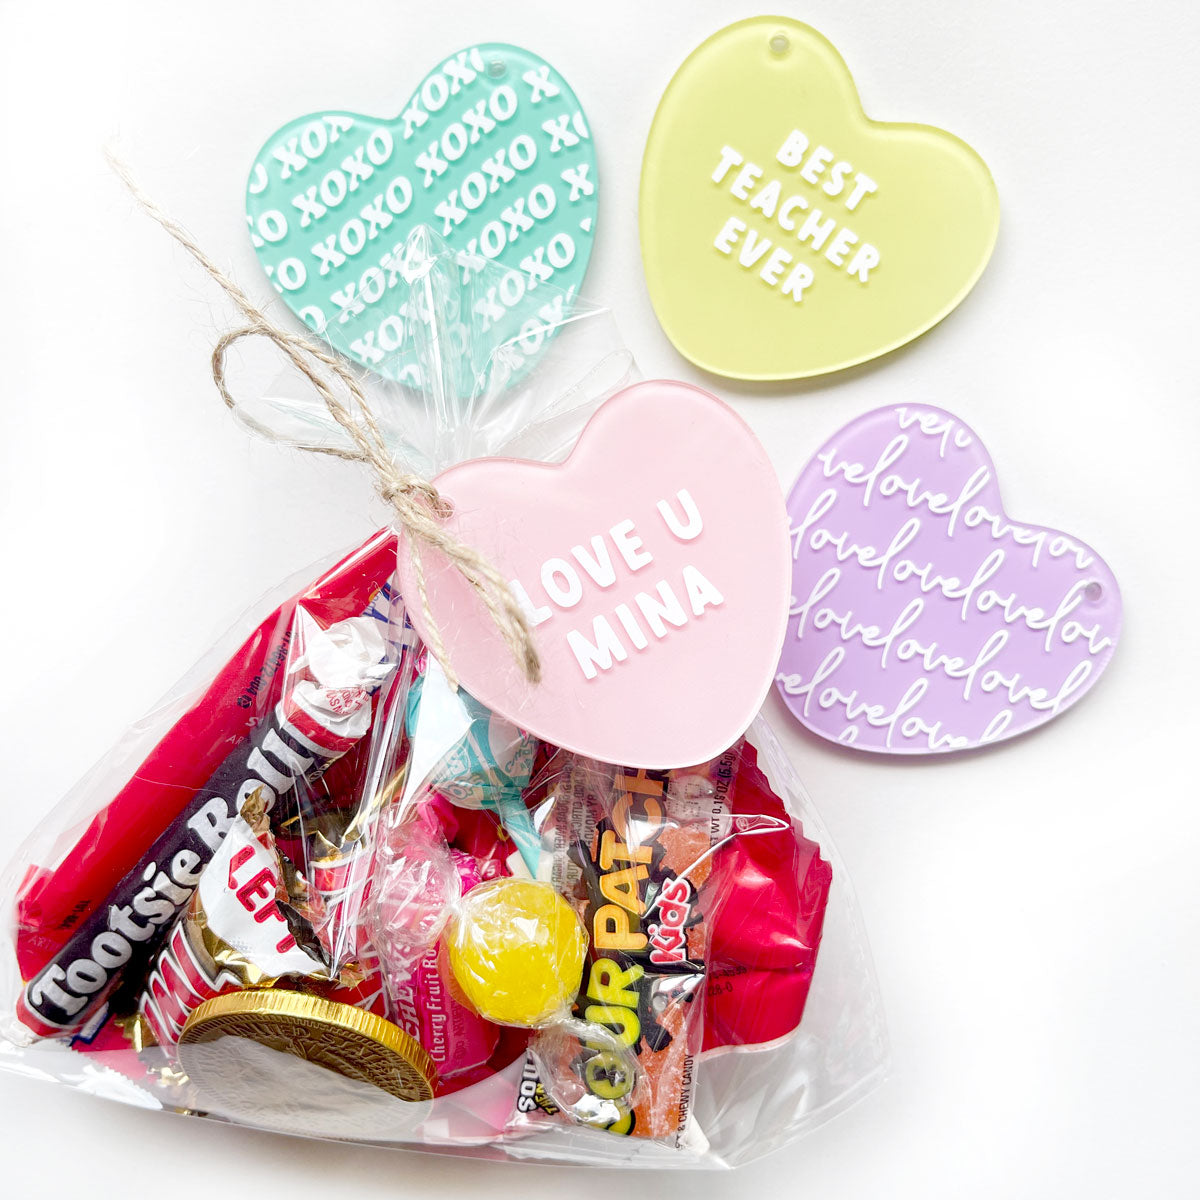 Heart Candy Blanks | With Discount